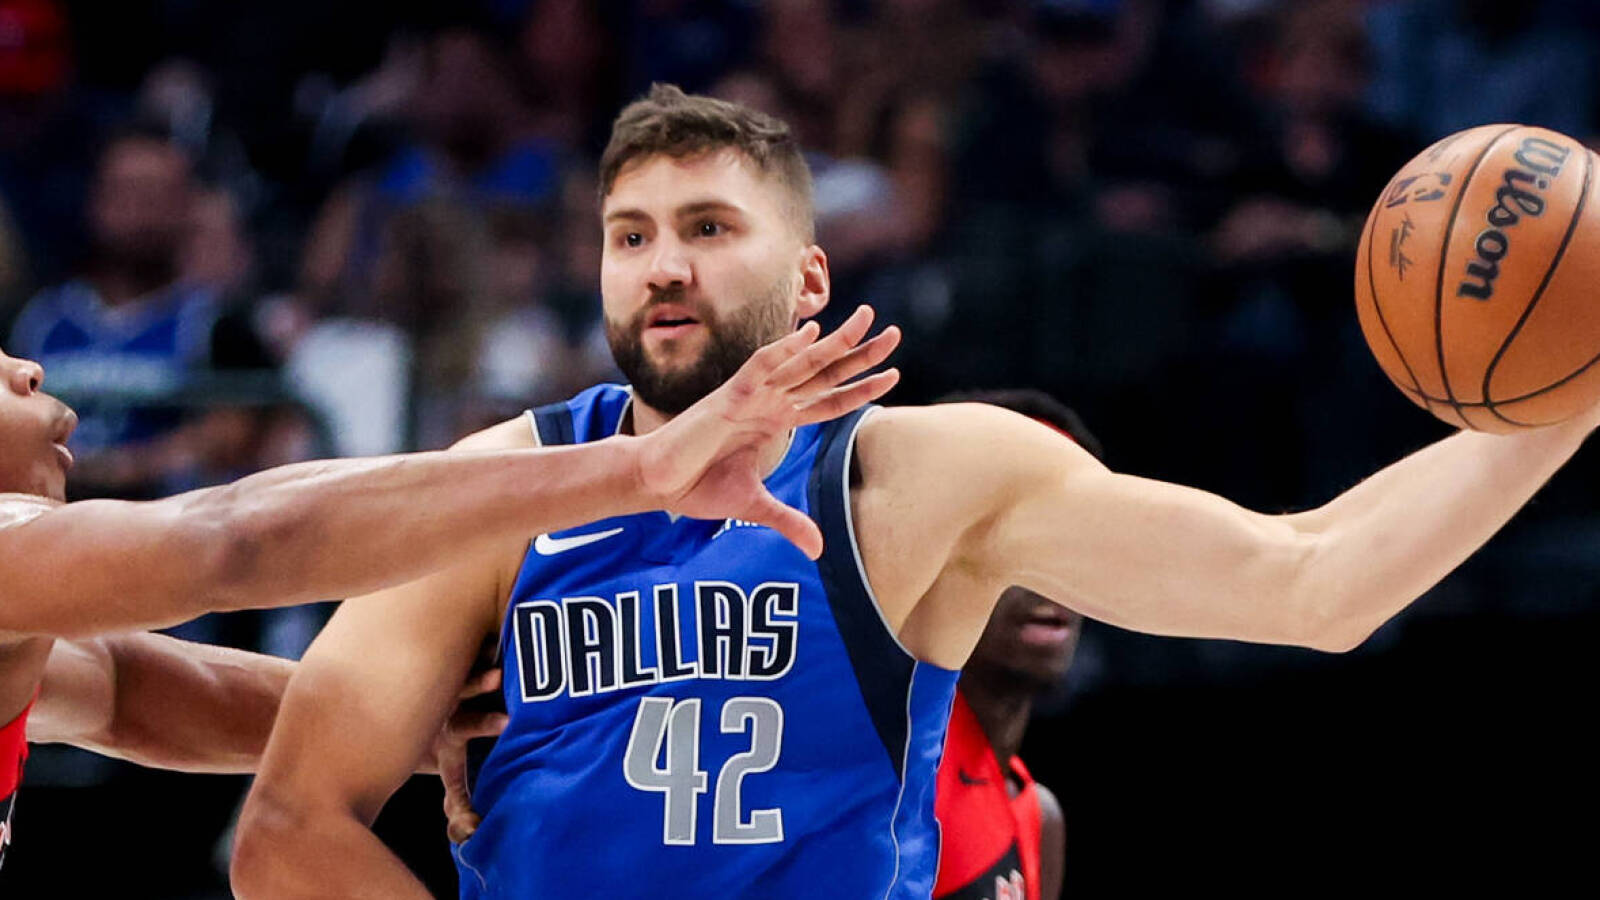 Mavericks lose key player for 'significant period of time'